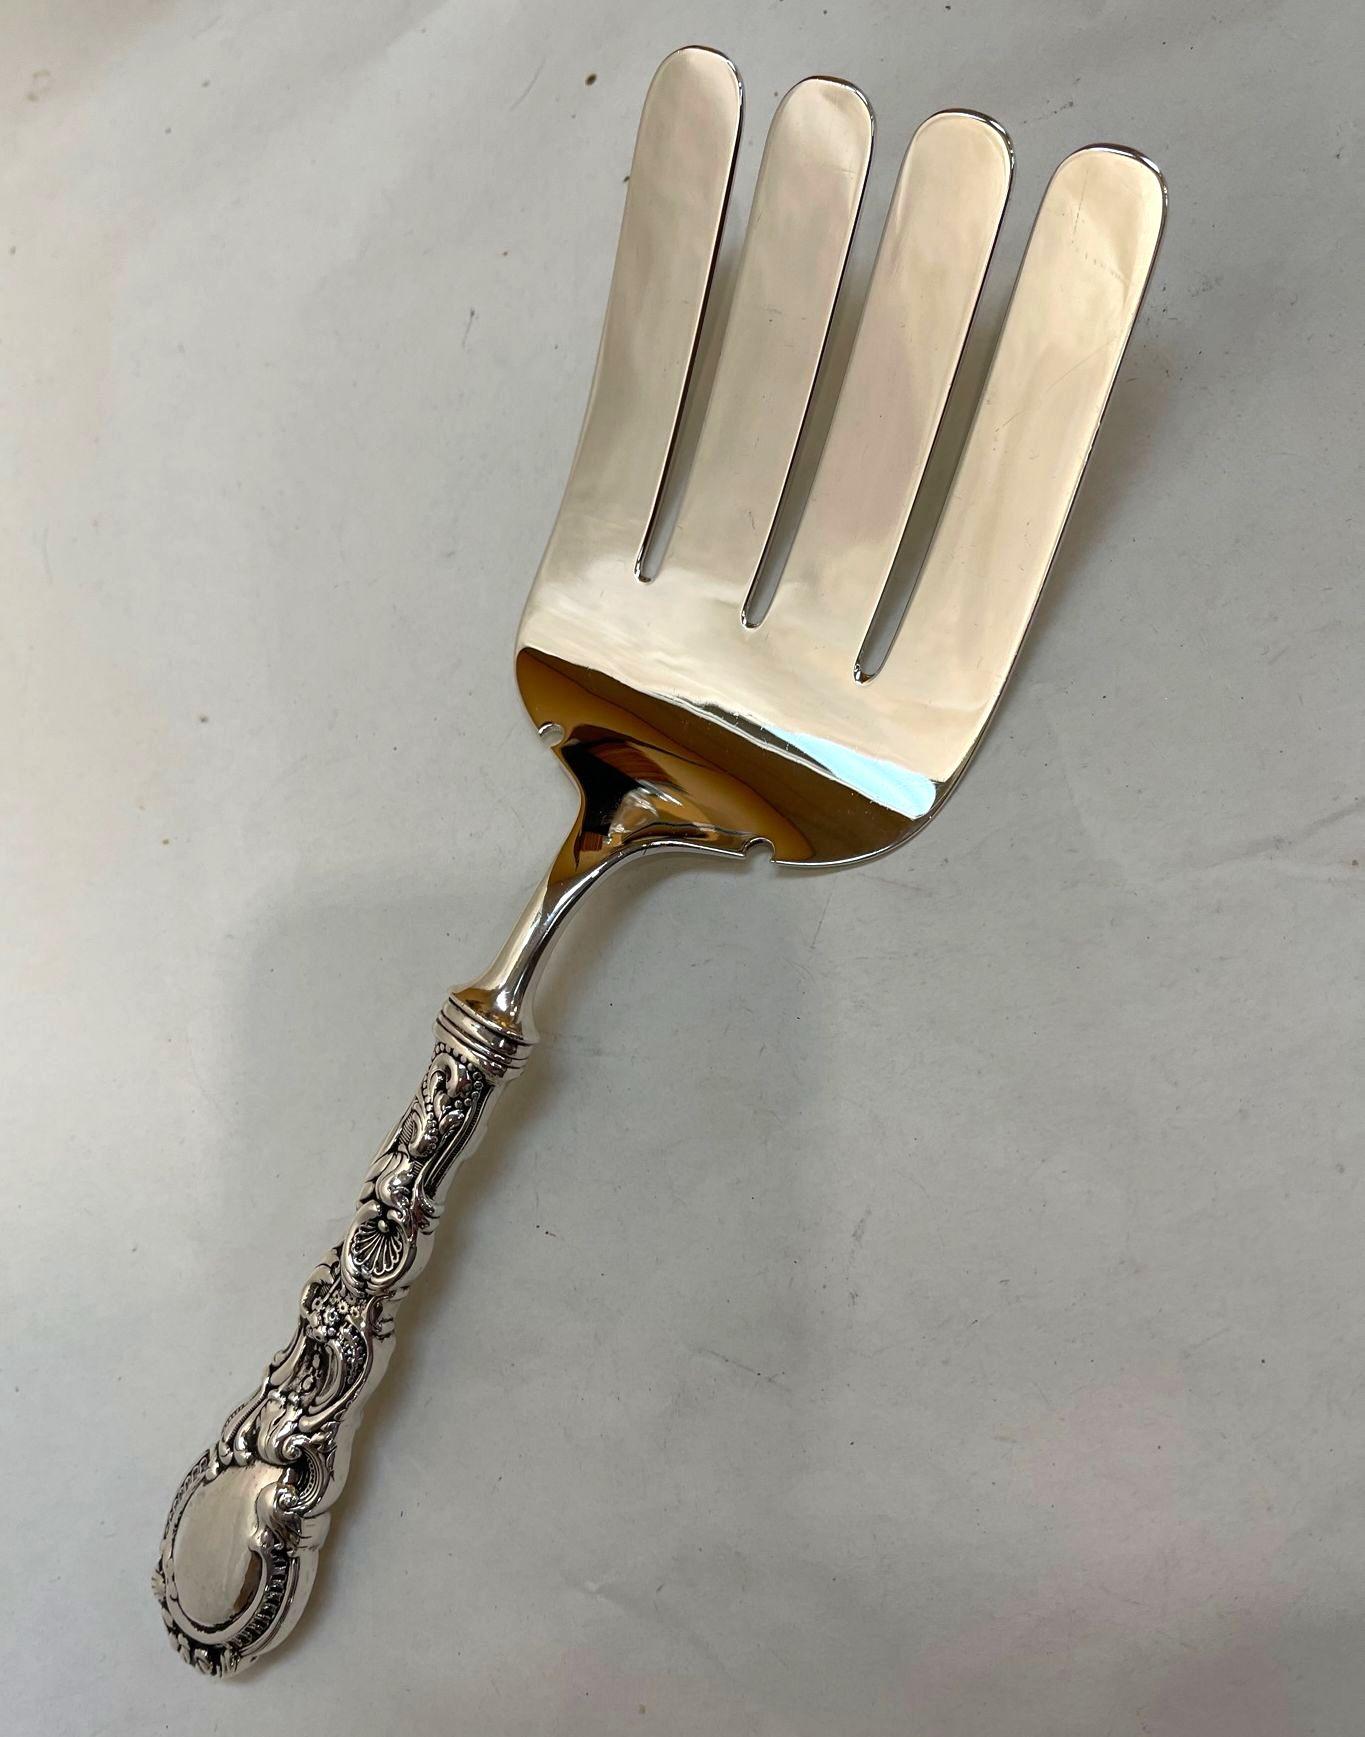 Mid-Century Modern Sterling Silver Vintage Asparagus Serving Fork Simply Awesome! Entirely in Sterling Silver Large Asparagus Serving Fork. Handle Beautifully crafted with Shell and Artisan designs. Large 3” x 4” serving surface. Fork measures 9.5”